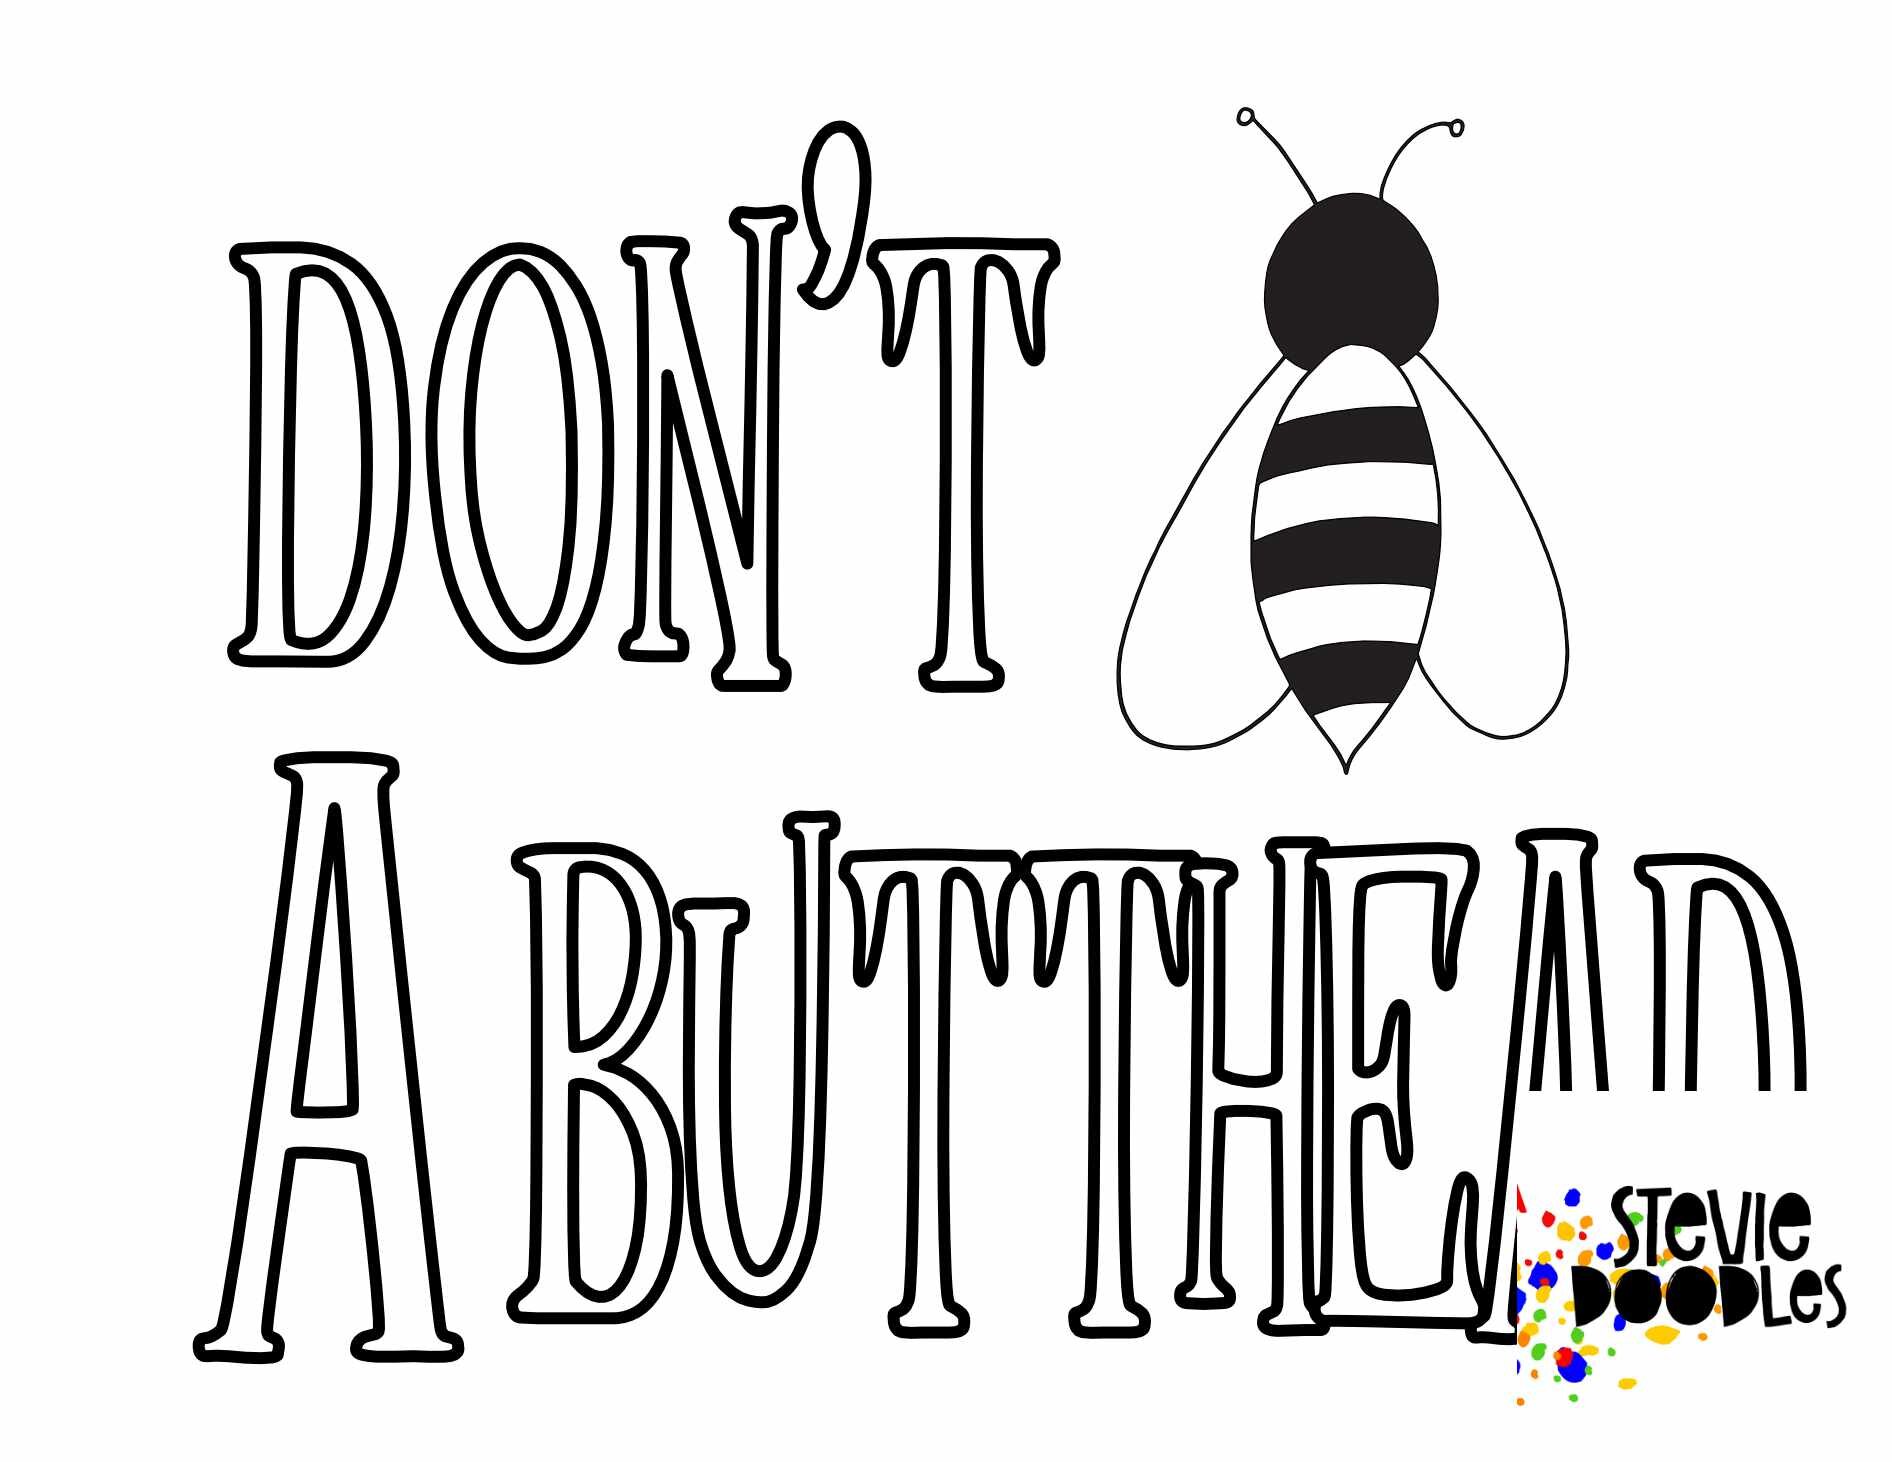 Don’t BEE  A Butthead - Free Printable Coloring Page Over 1000 free coloring pages at Stevie Doodles